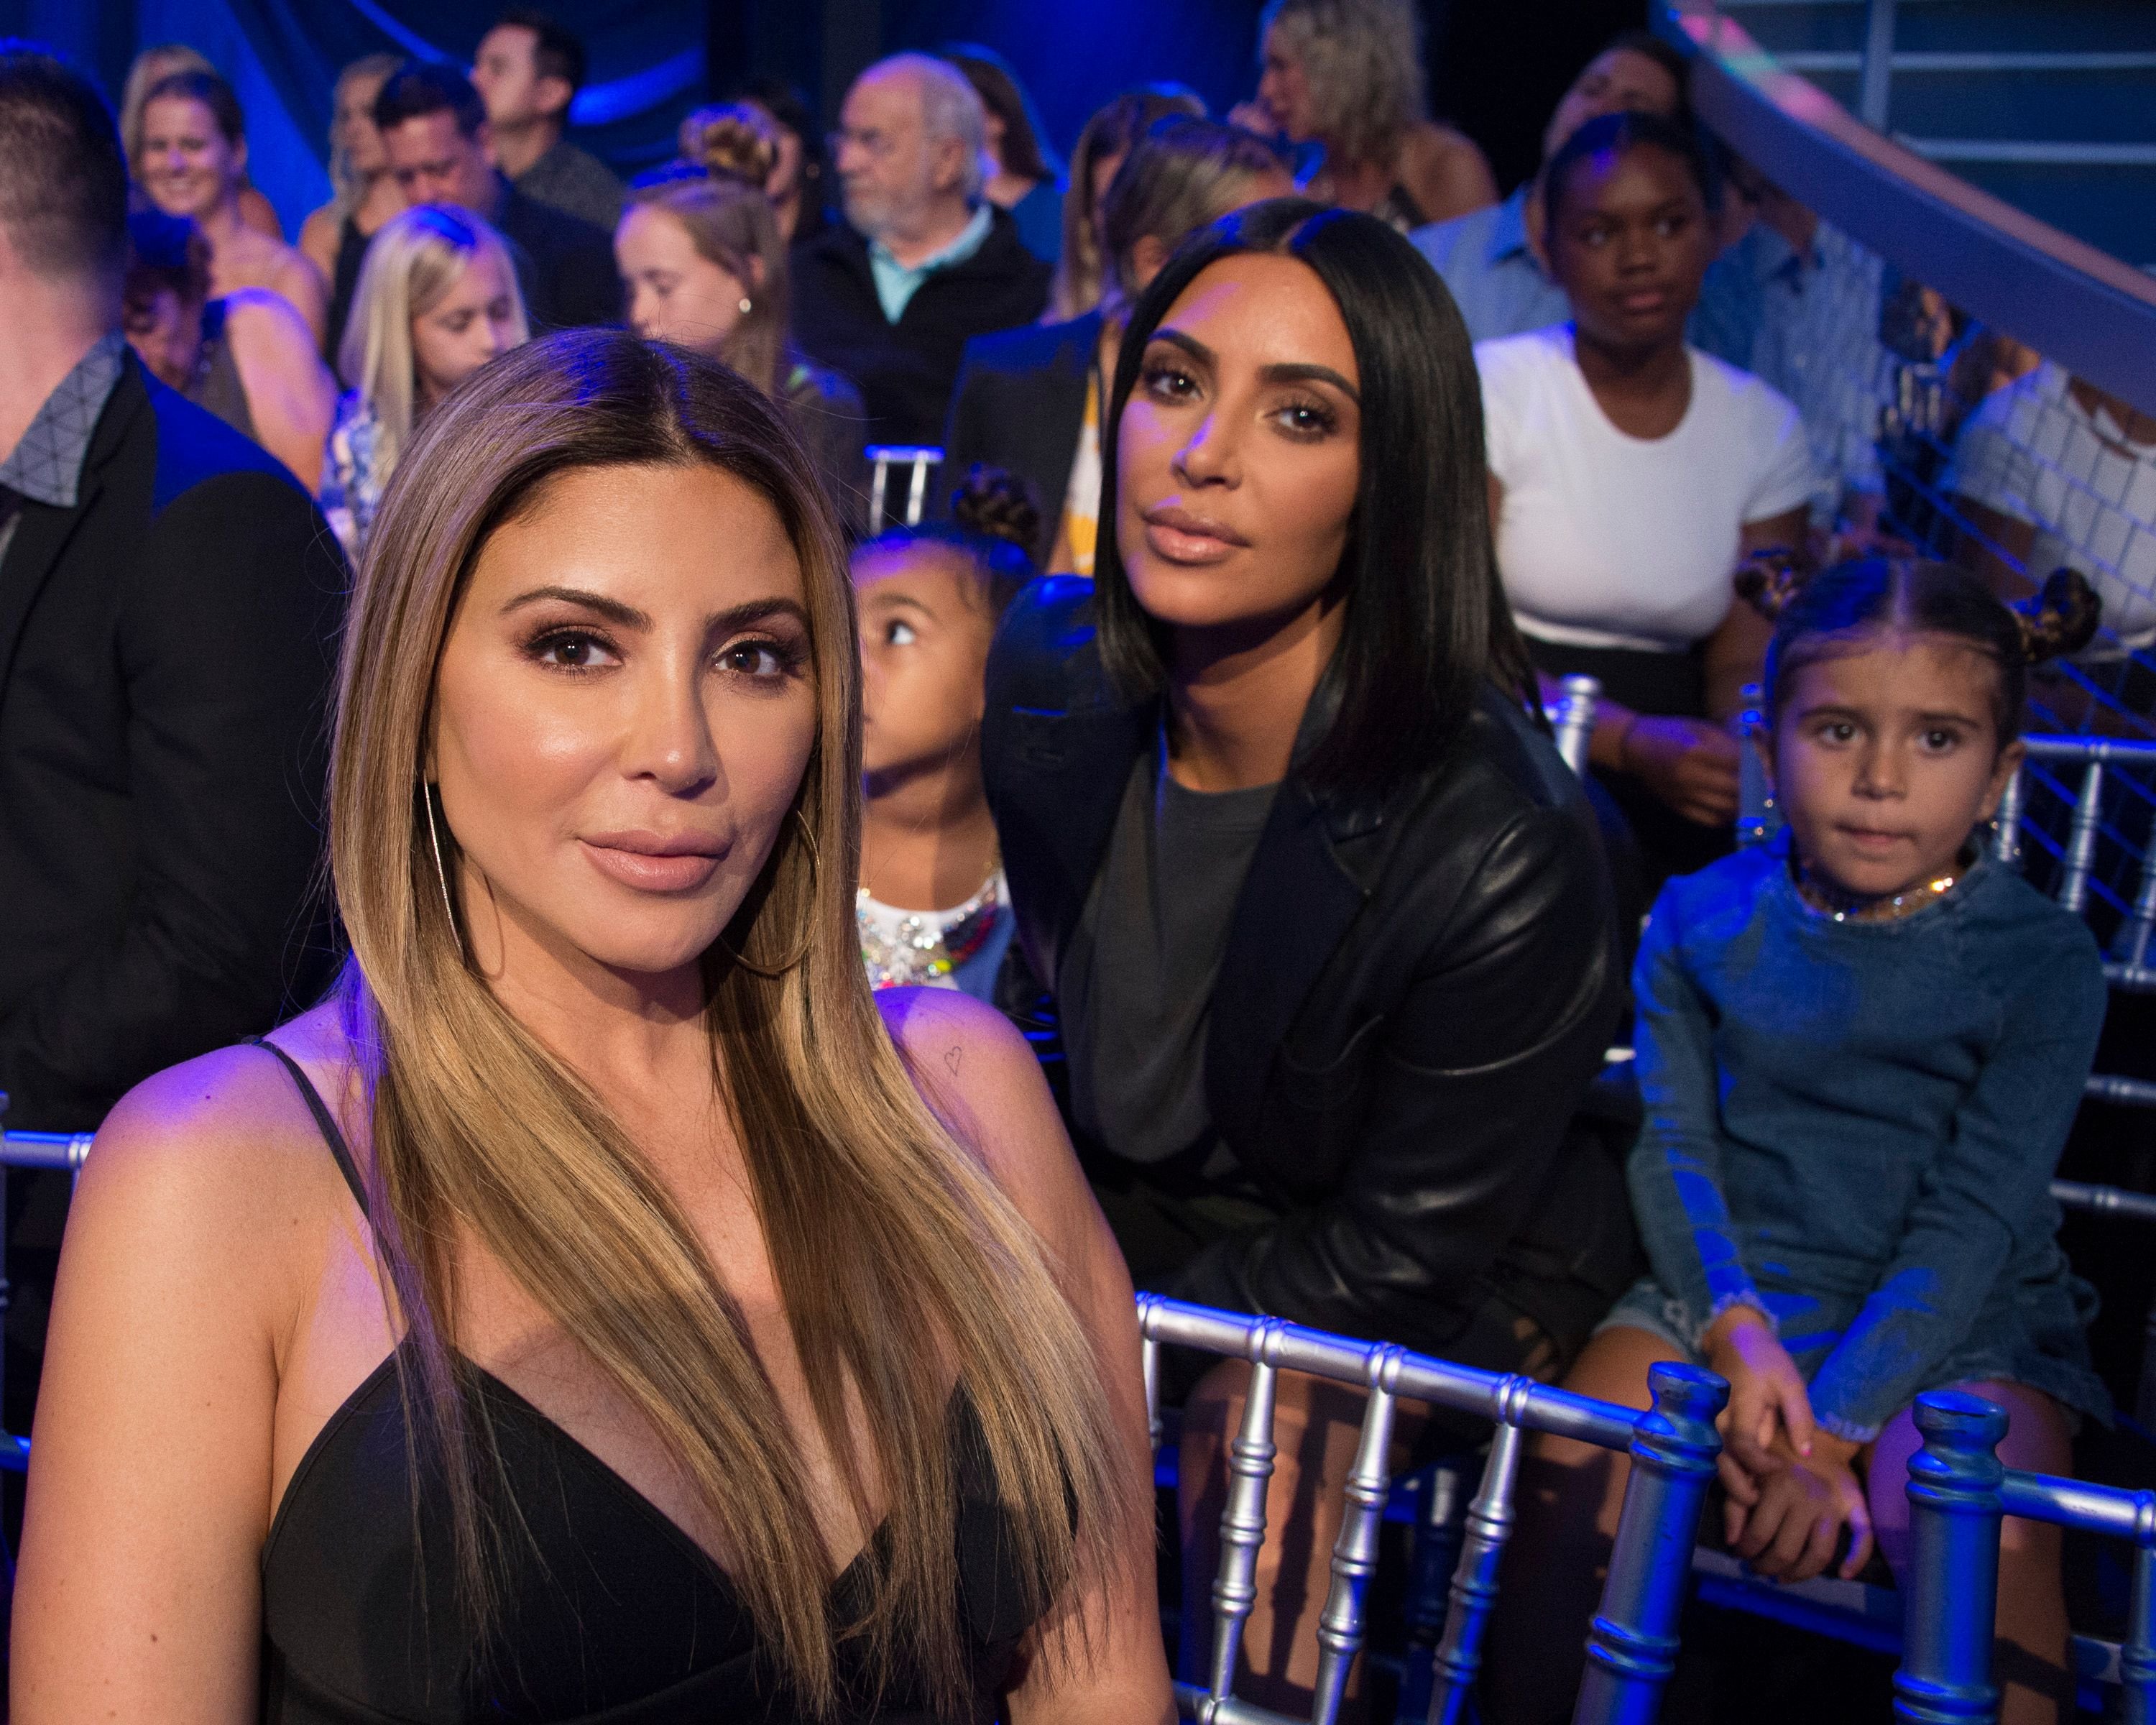 Kim Kardashian and Larsa Pippen at the special two-hour premiere of "Dancing with the Stars: Juniors." | Photo: Getty Images.